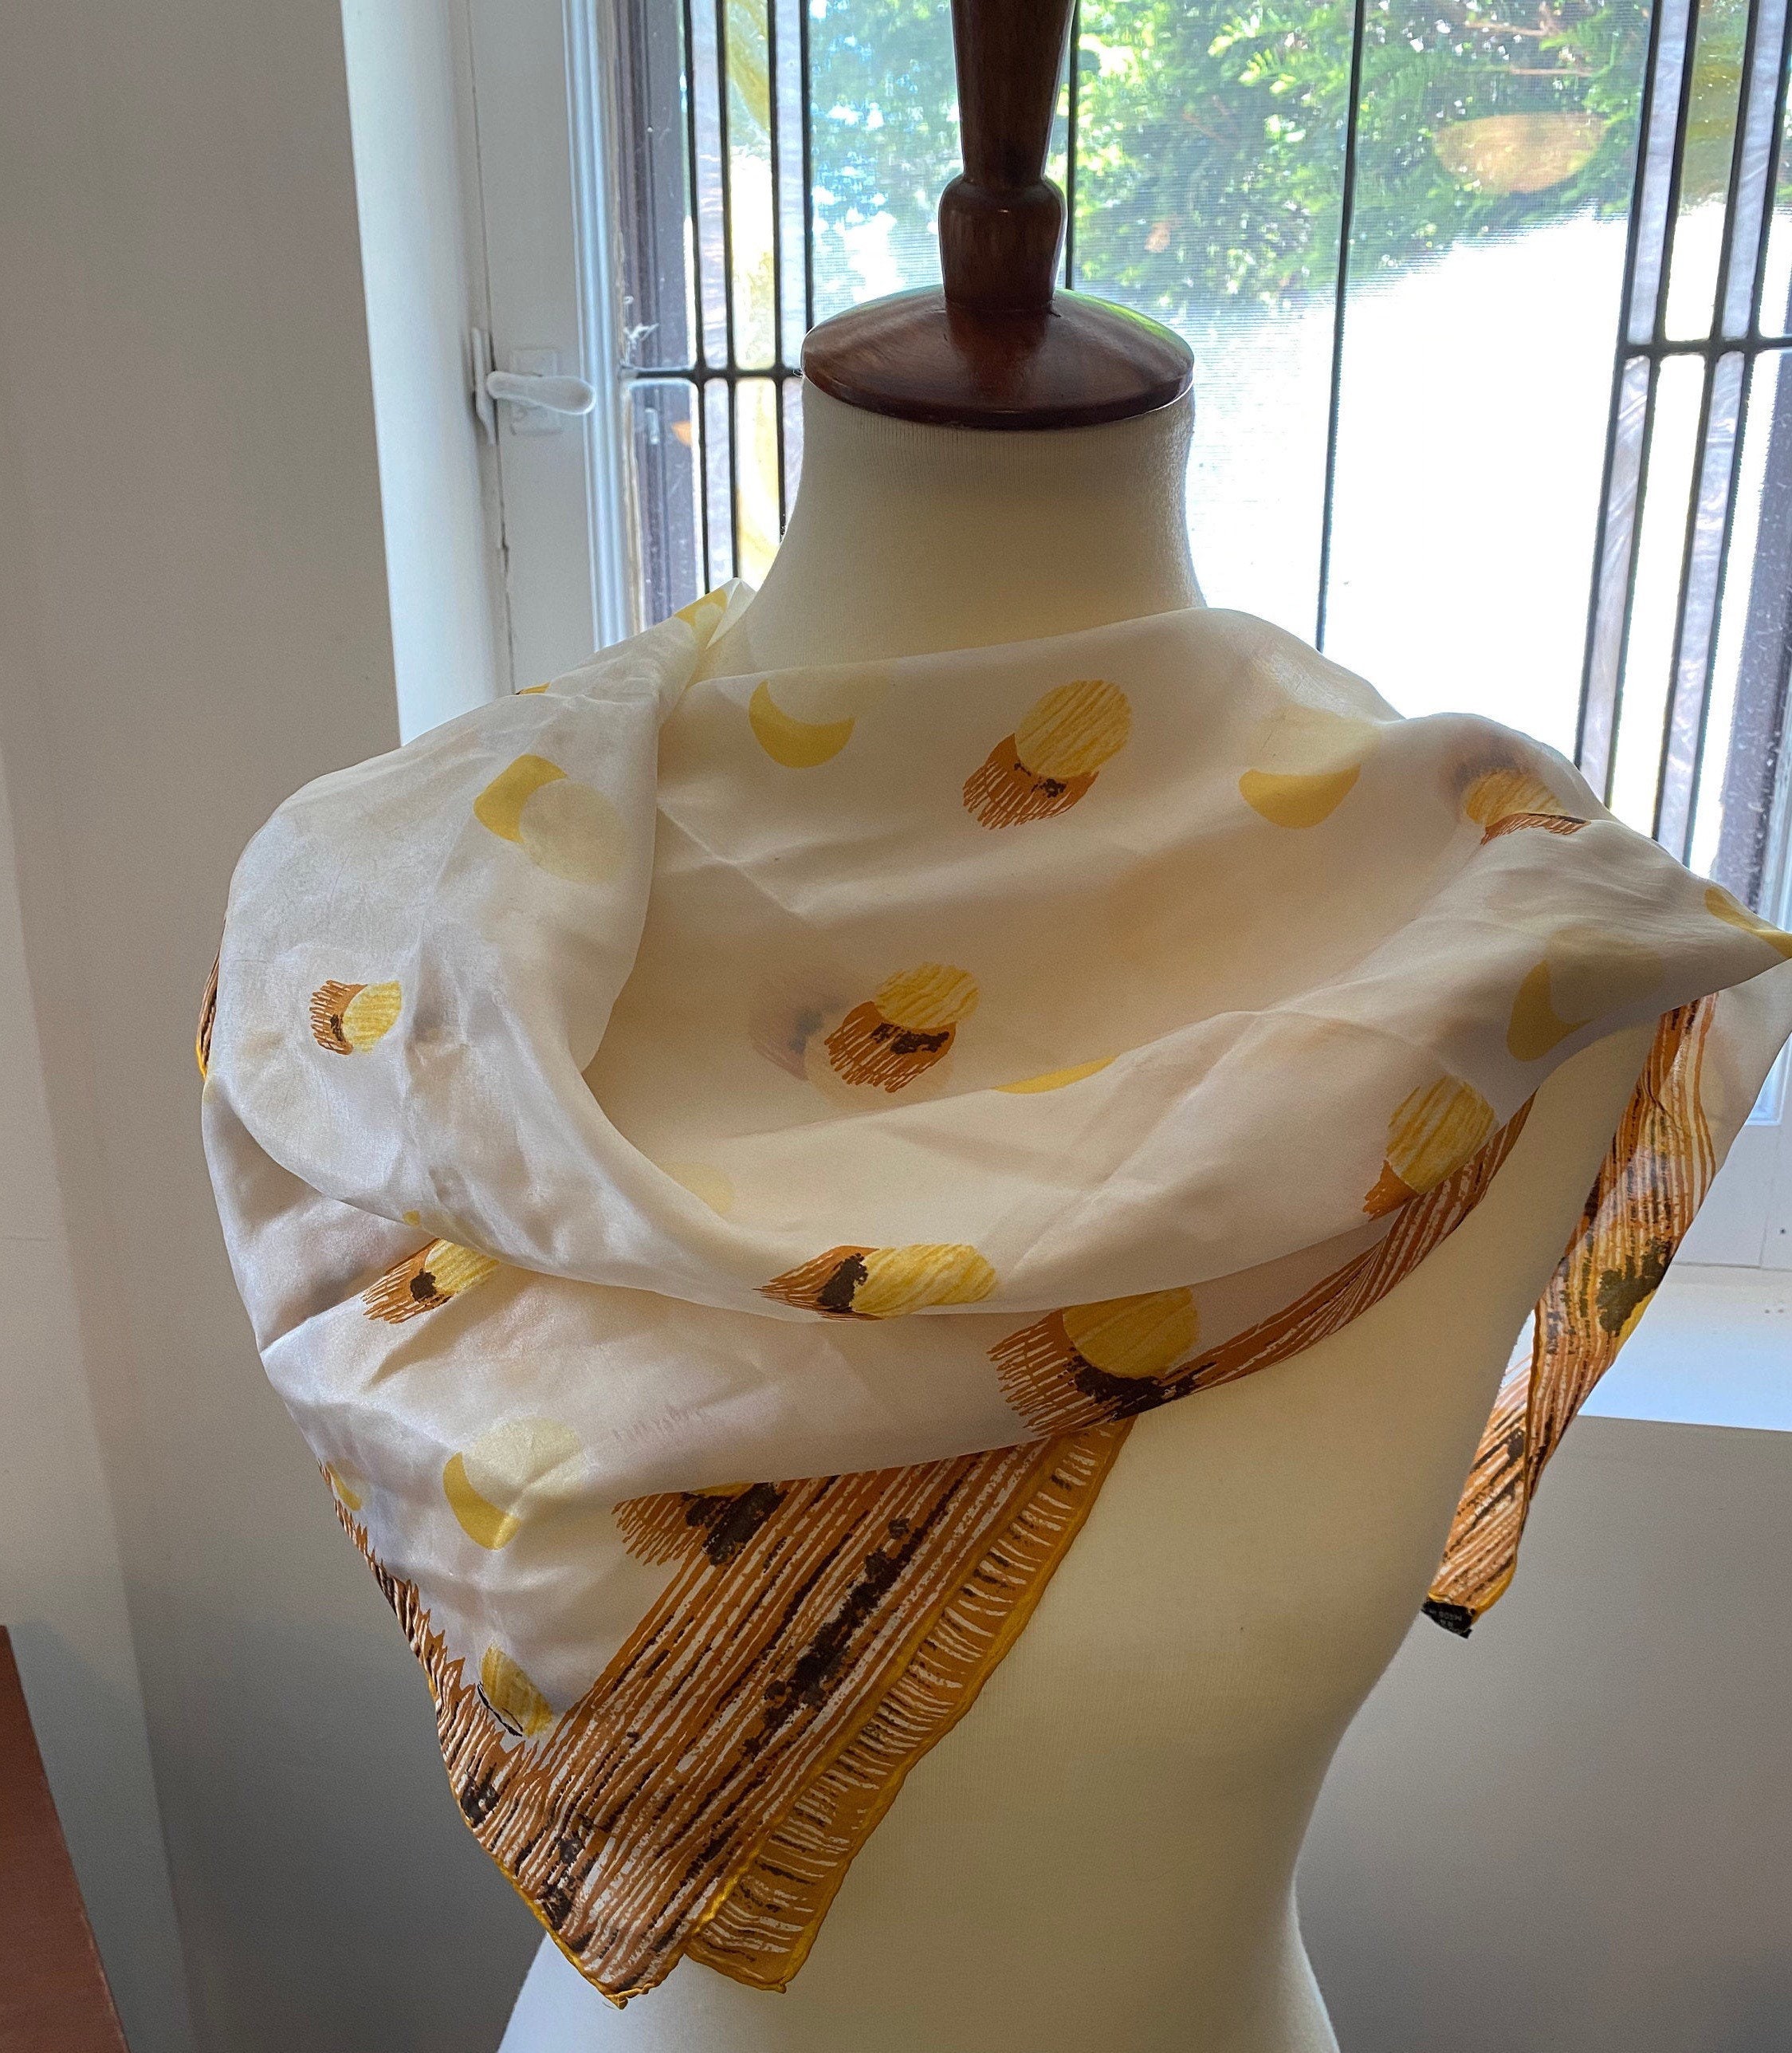 Ladies 100% Silk Oblong Scarf – Priory in the USA Gift Shop